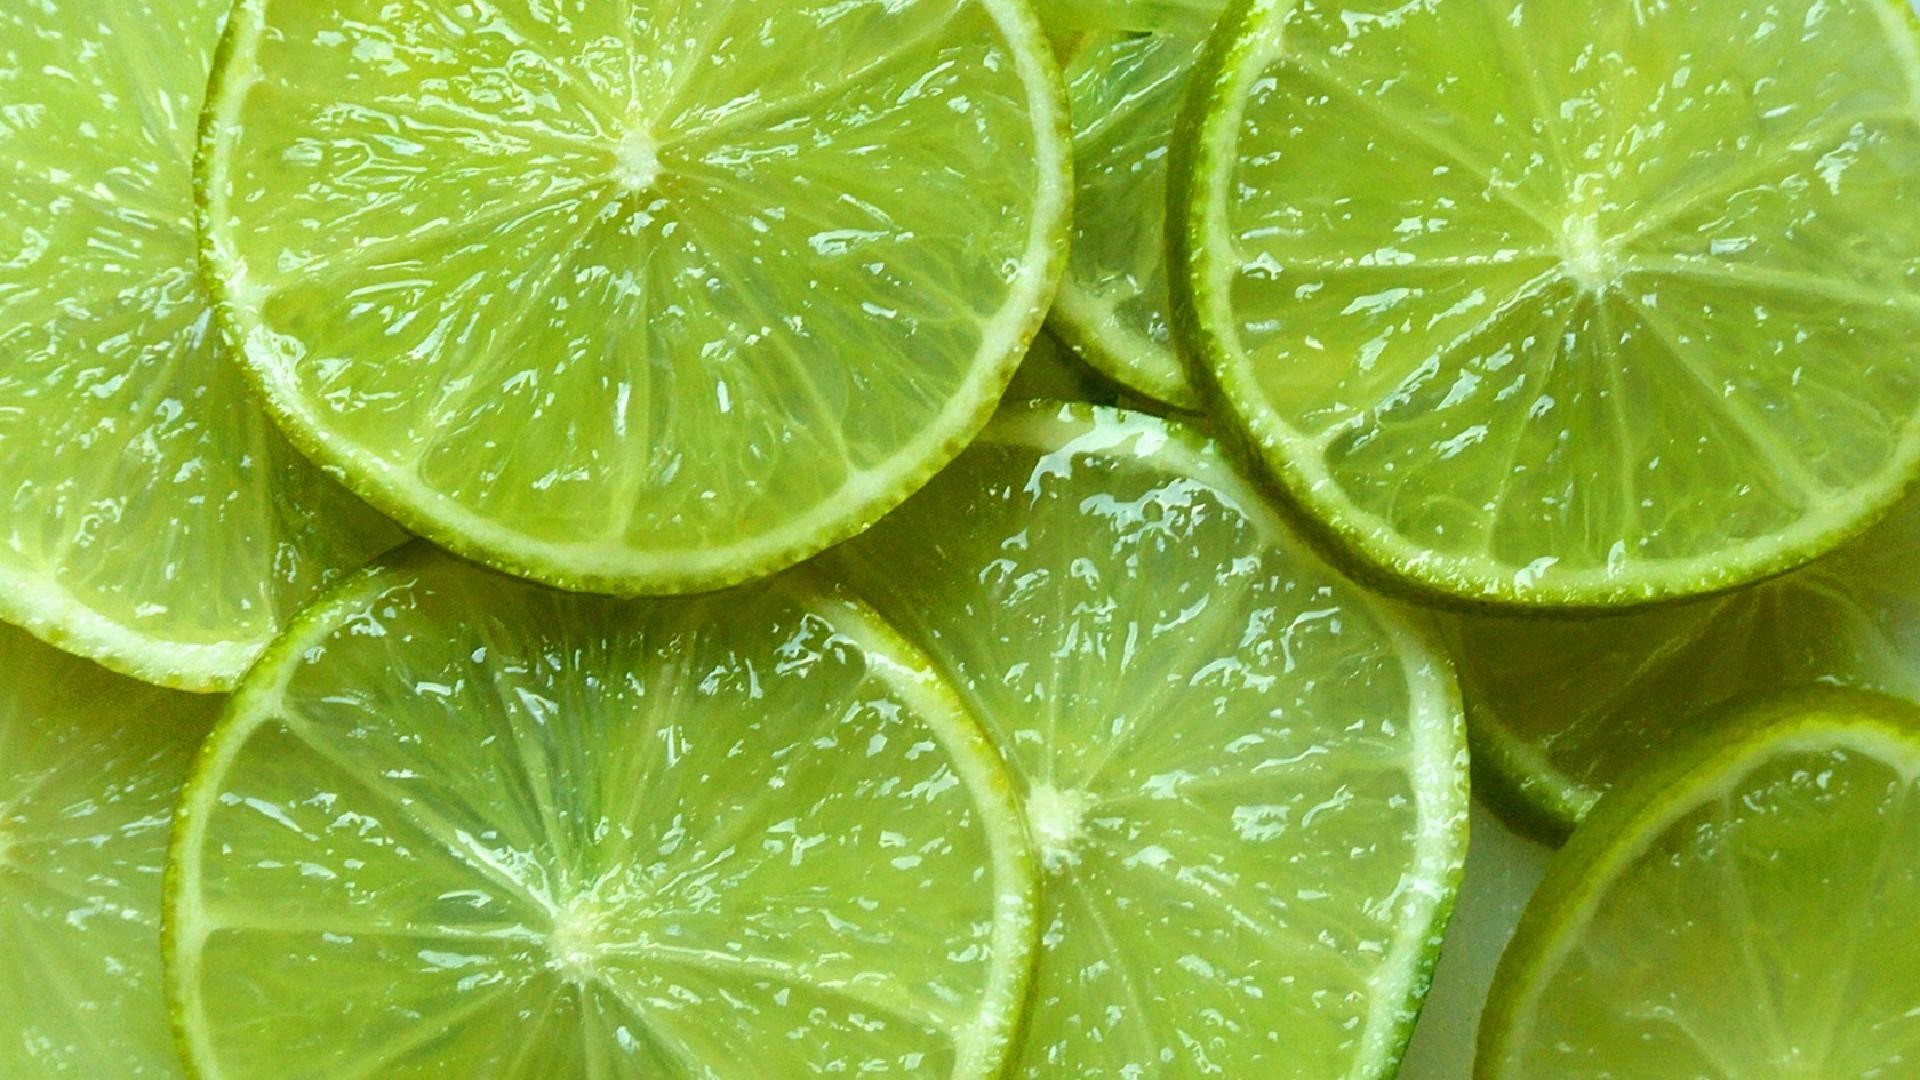 Wallpaper HD Lime Green with image resolution 1920x1080 pixel. You can make this wallpaper for your Desktop Computer Backgrounds, Mac Wallpapers, Android Lock screen or iPhone Screensavers